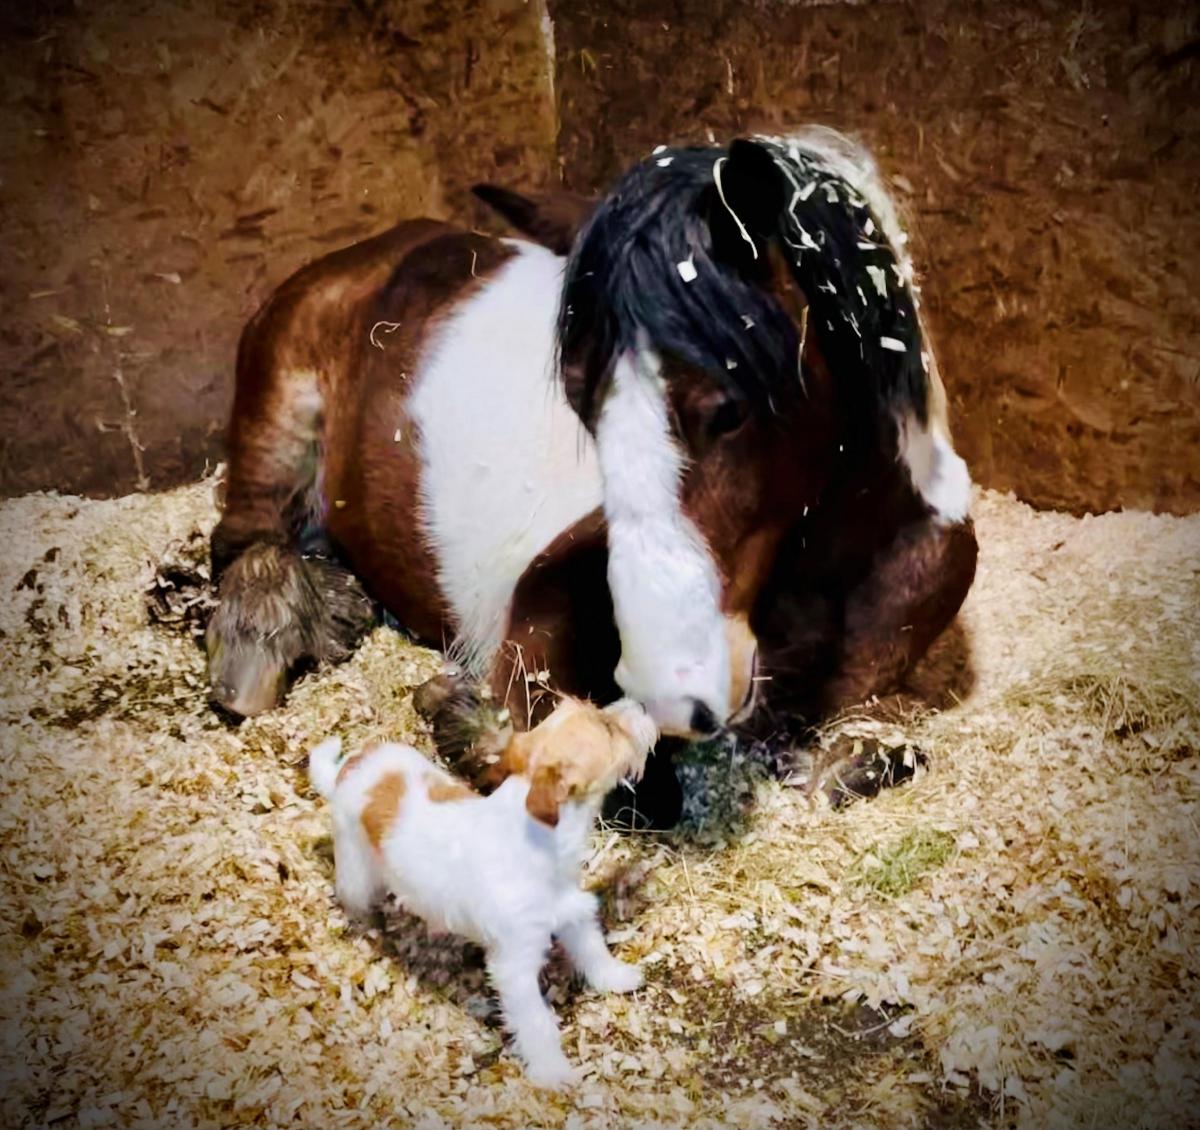 June Clayton (The Stables - North Drumboy) - Riley our Jack Russell and stable girl tucking her best friend Cruise in for the night